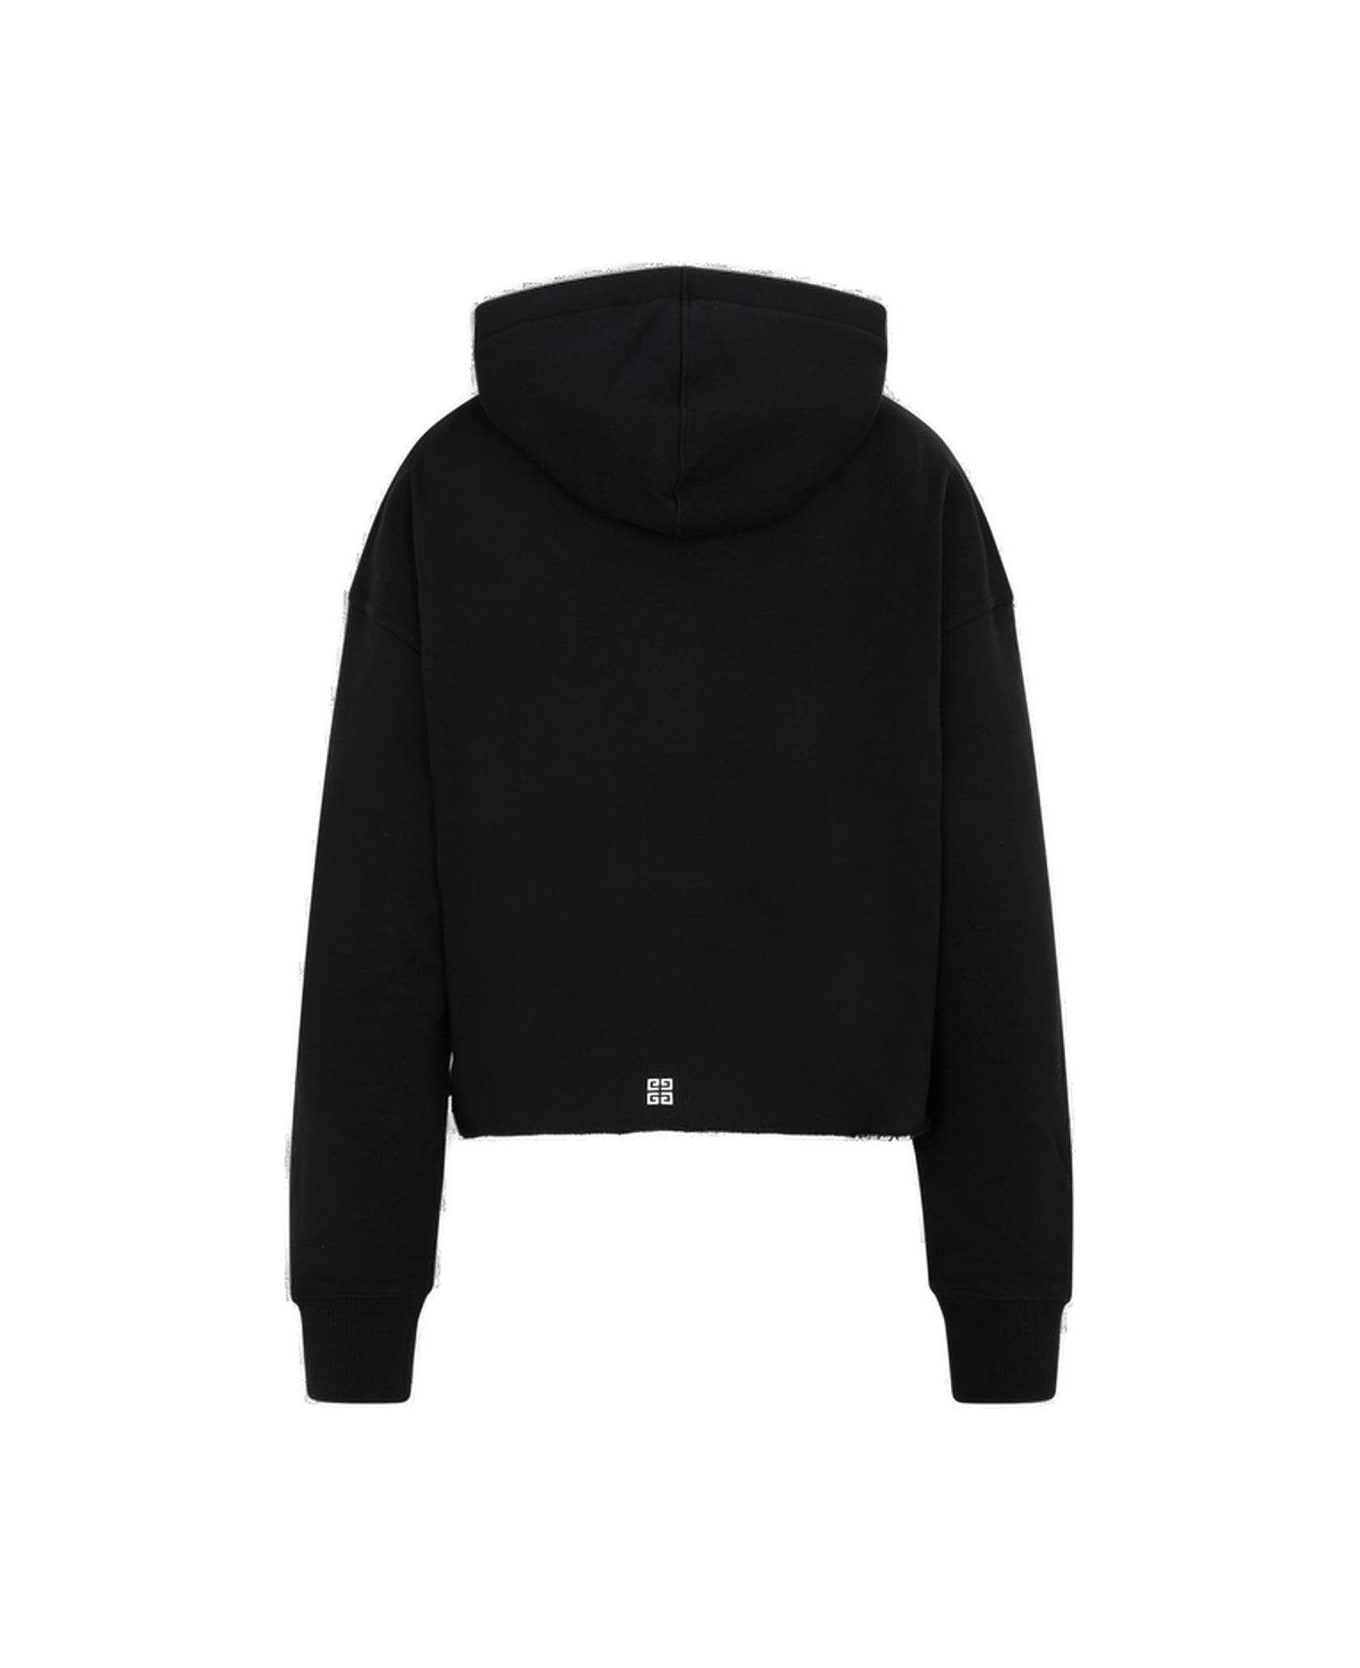 Givenchy Cotton Hoodie - Black